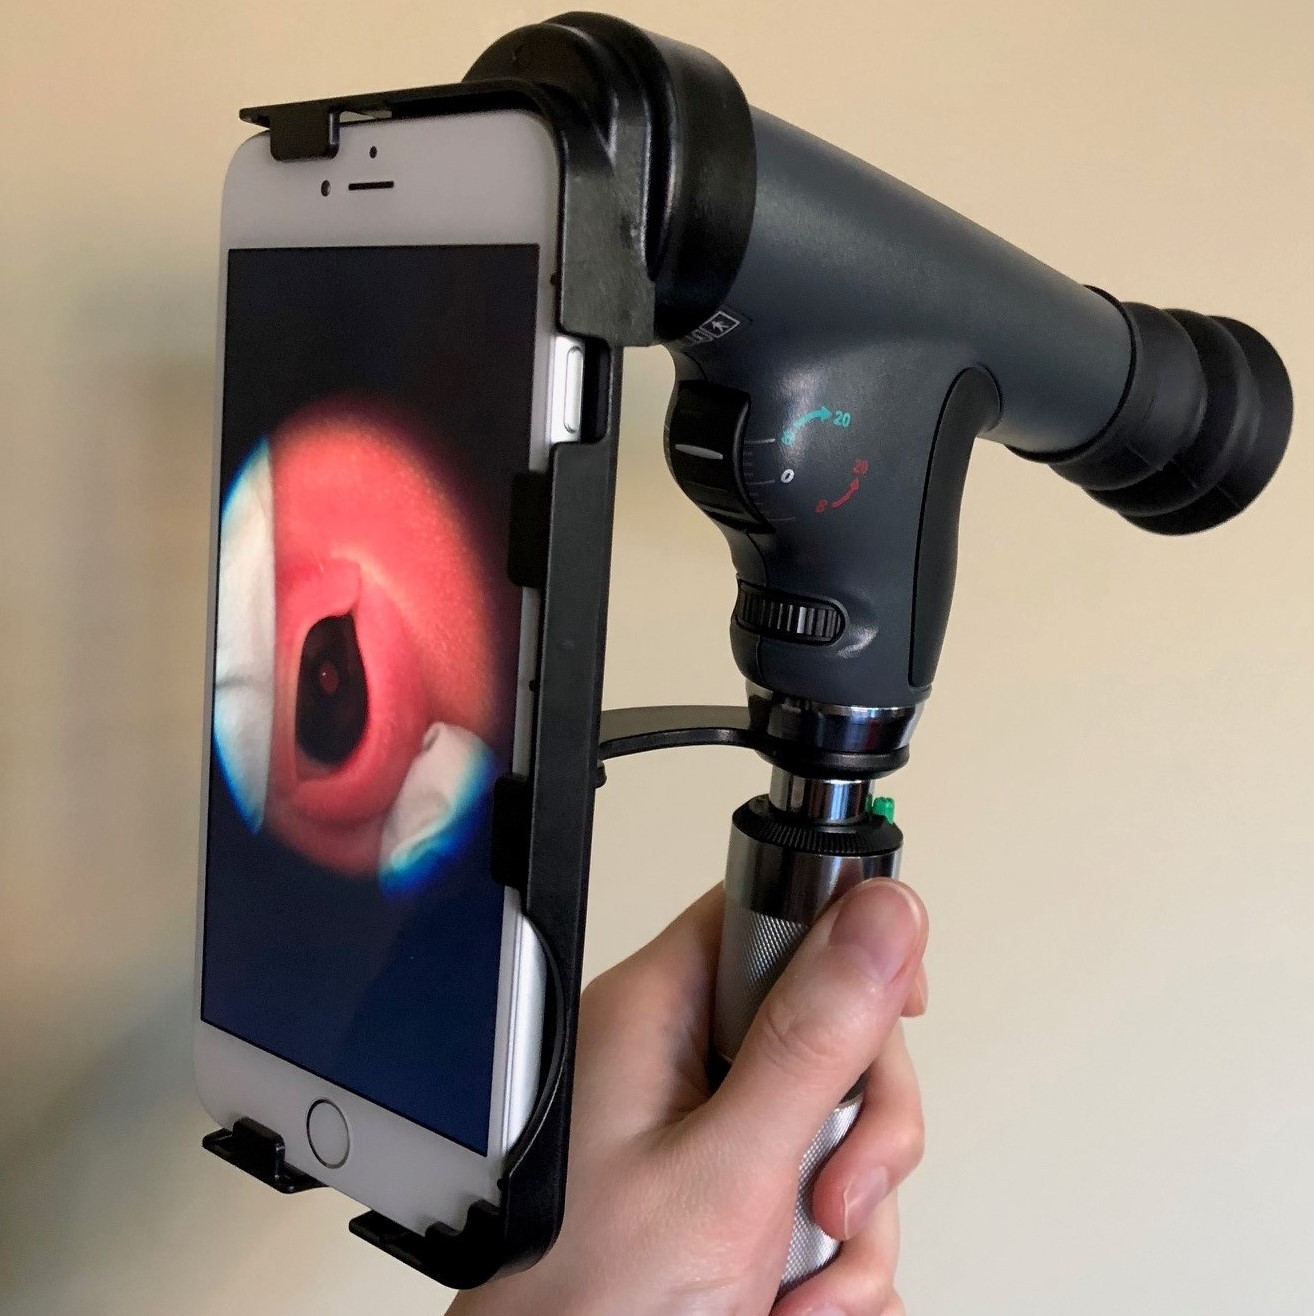  Farsiu deep learning handheld cell phone camera pediatric Open-source, machine and deep learning-based automated algorithm for gestational age estimation through smartphone lens imaging